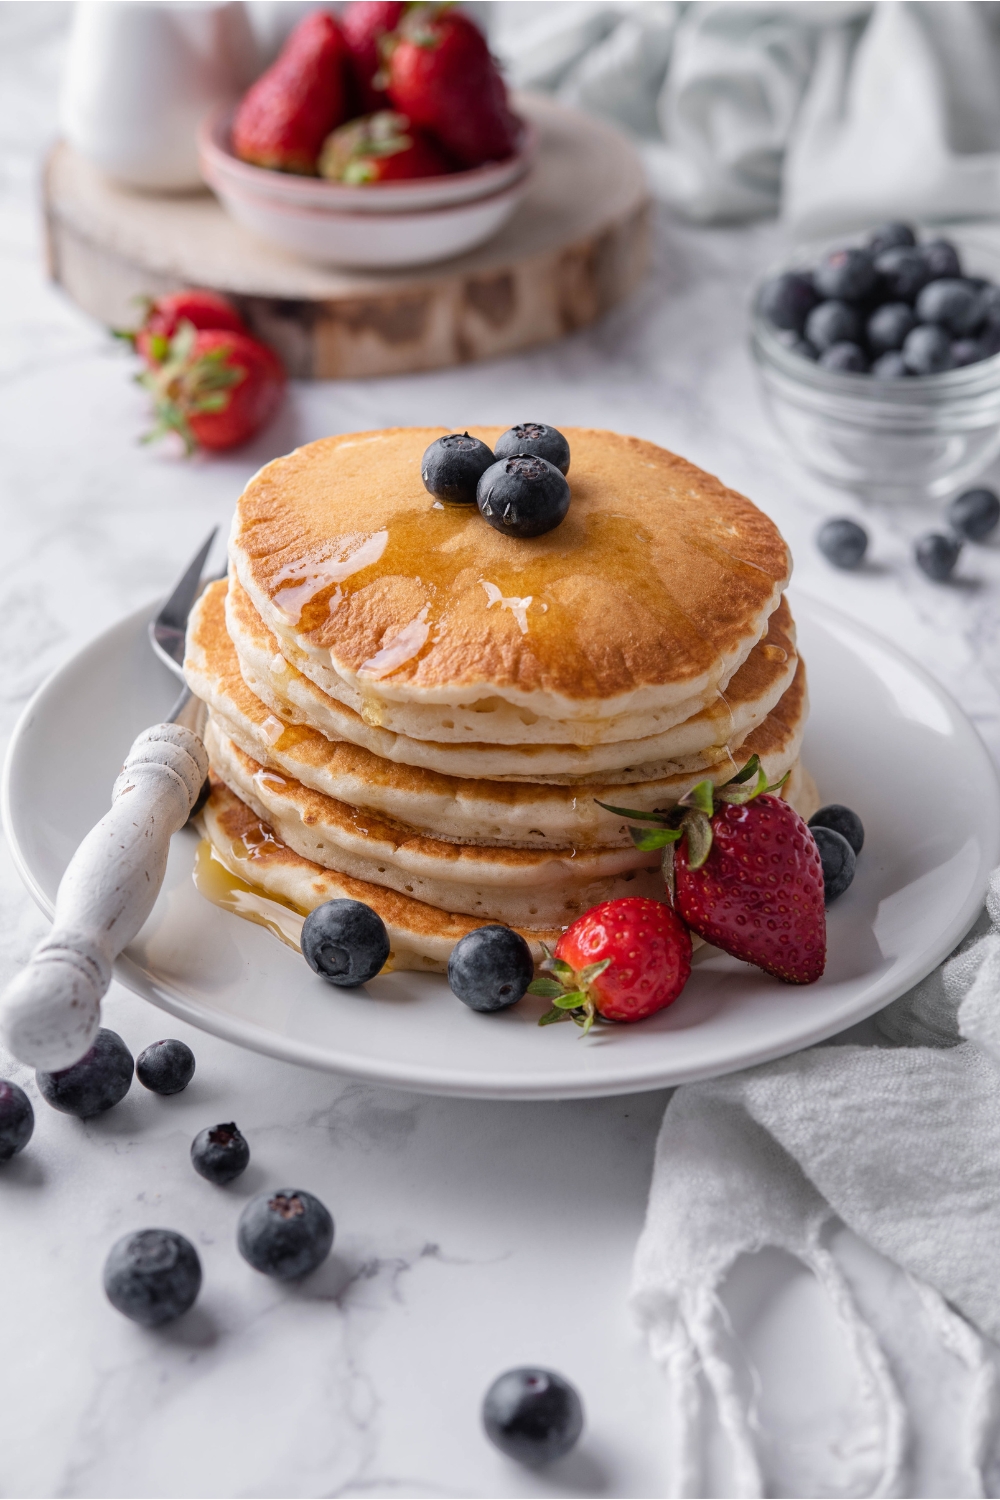 A stack of pancakes topped with maple syrup and blueberries on a white plate with a fork and strawberries on the plate beside the pancakes. Berries are scattered on the counter and in the background.